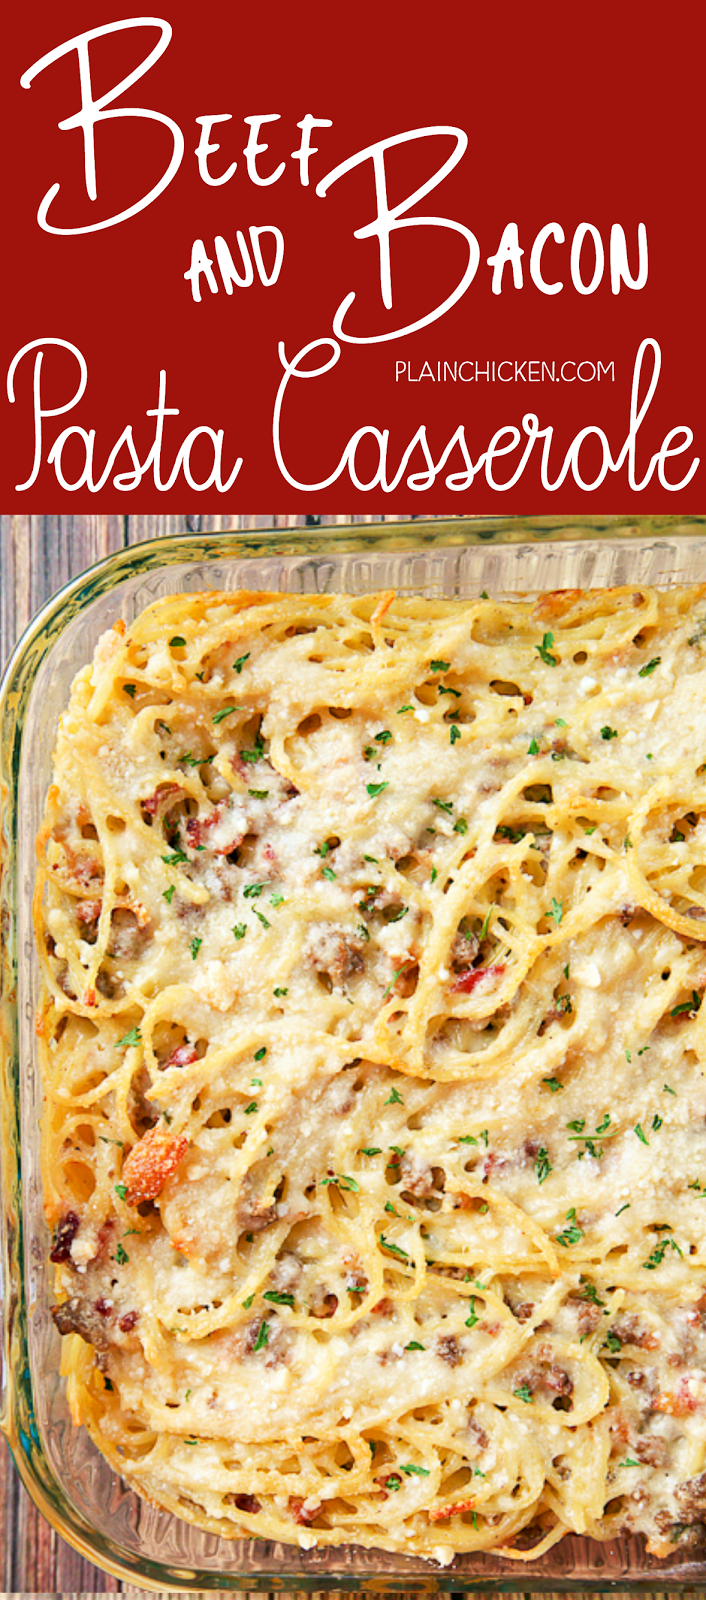 Bacon and Beef Pasta Casserole | Plain Chicken®